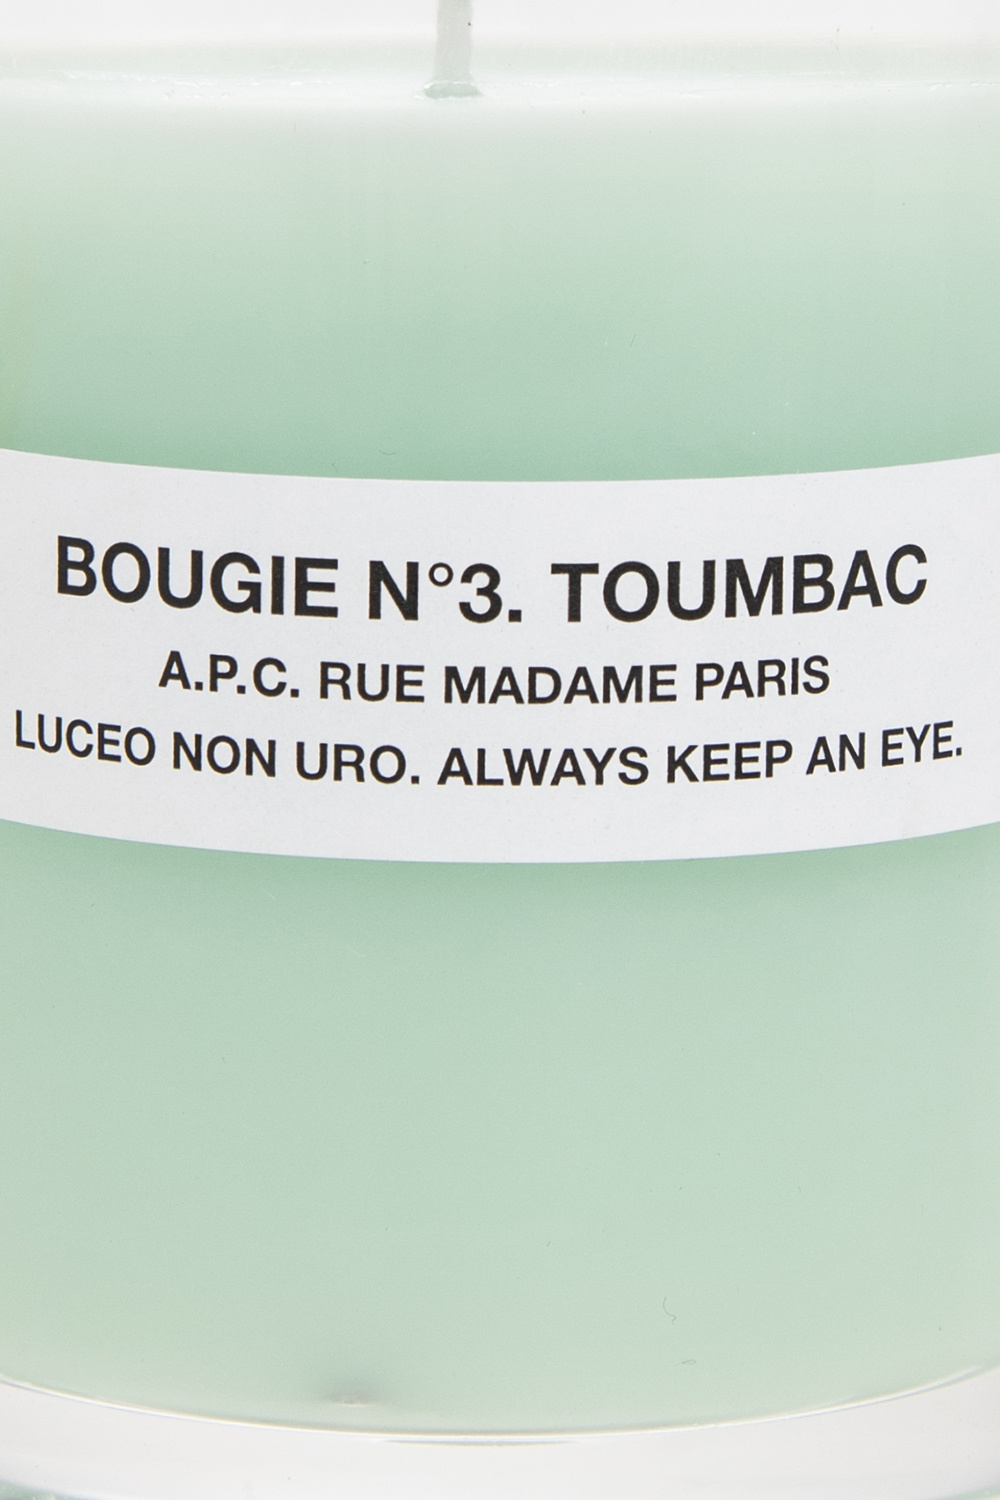 A.P.C. 'Bougie N°3. Toumbac’ scented candle